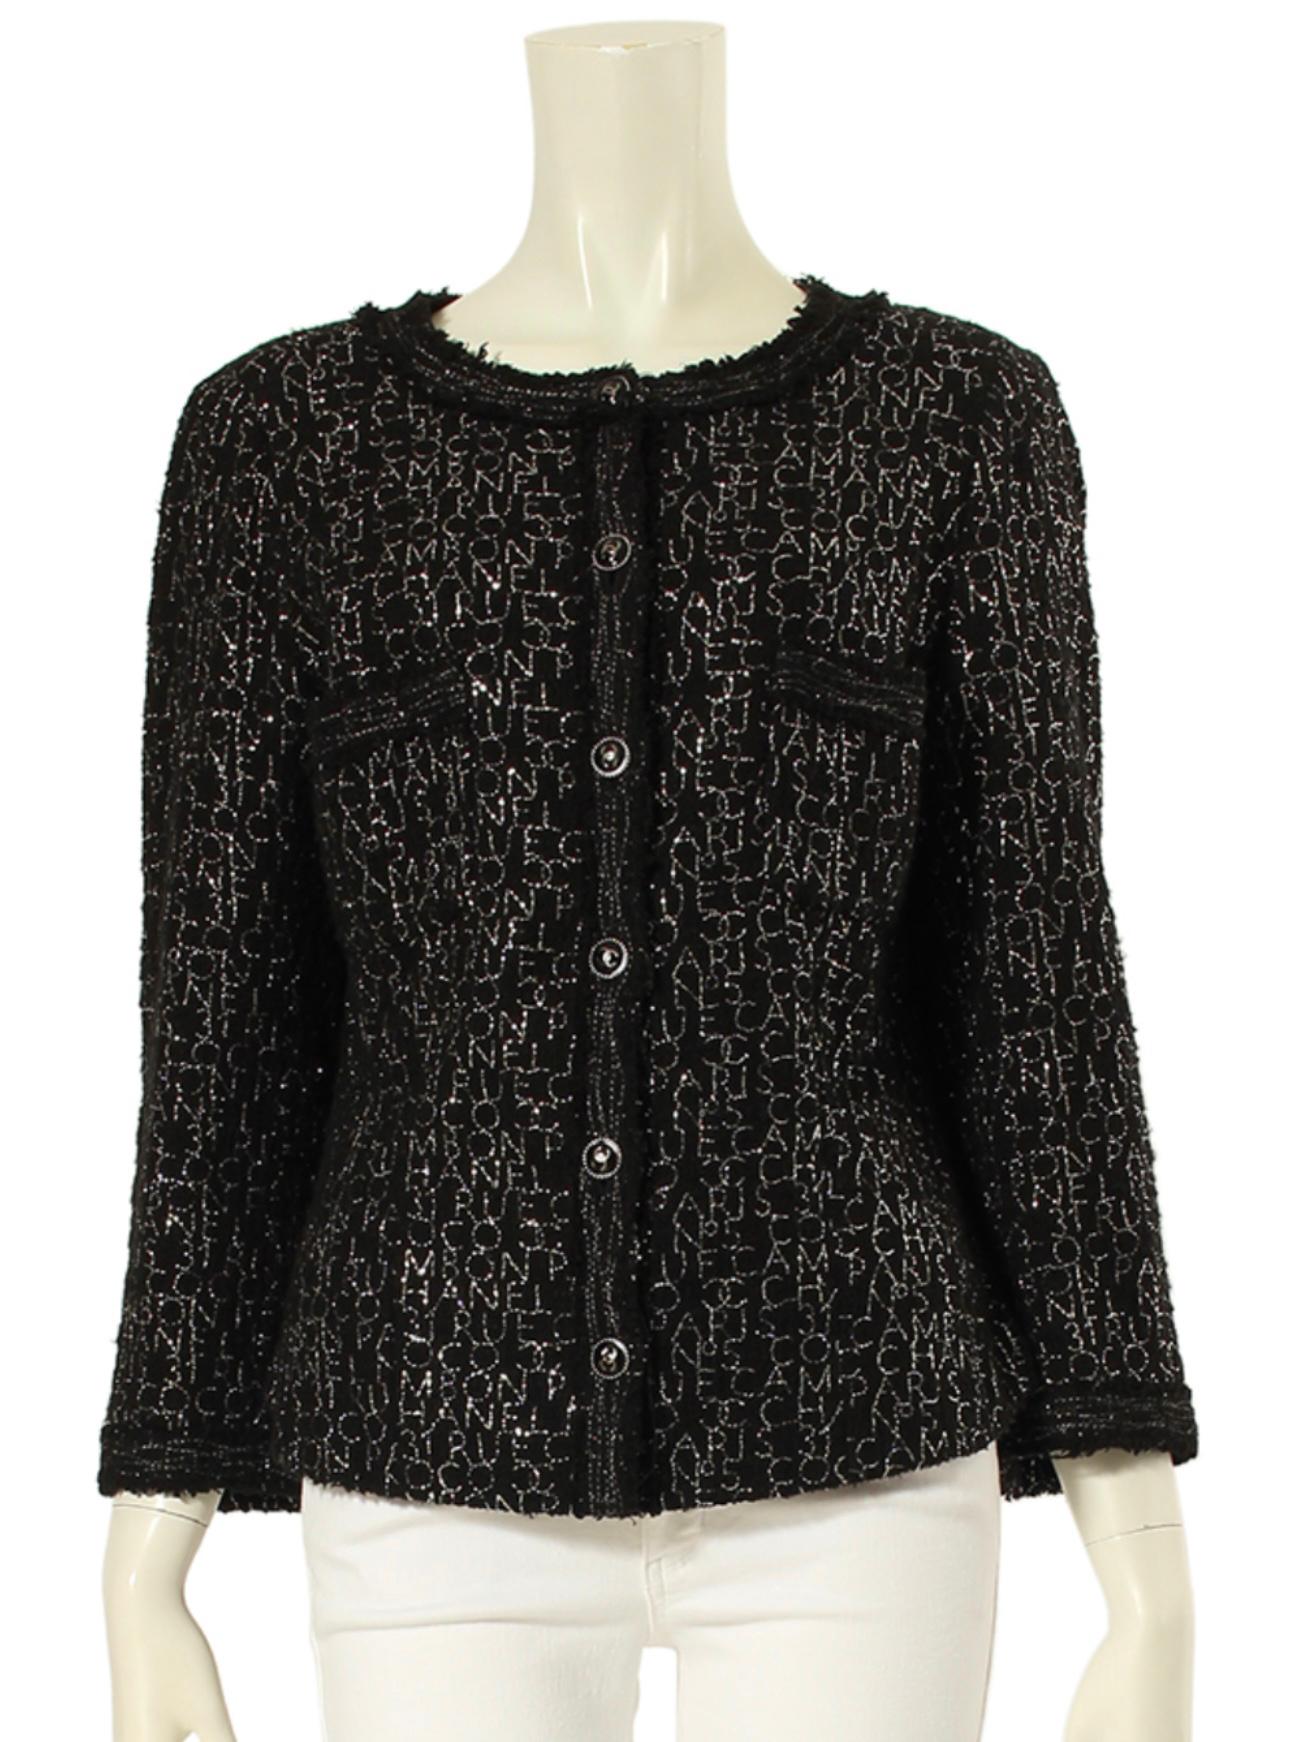 Absolutely stunning Chanel black tweed jacket with shimmering Logos and 31 Rue Cambon lettering -- a rare and collectible piece!
- CC logo buttons
- black silk lining, chain link at hem
Size mark 38 FR. Pristine condition.